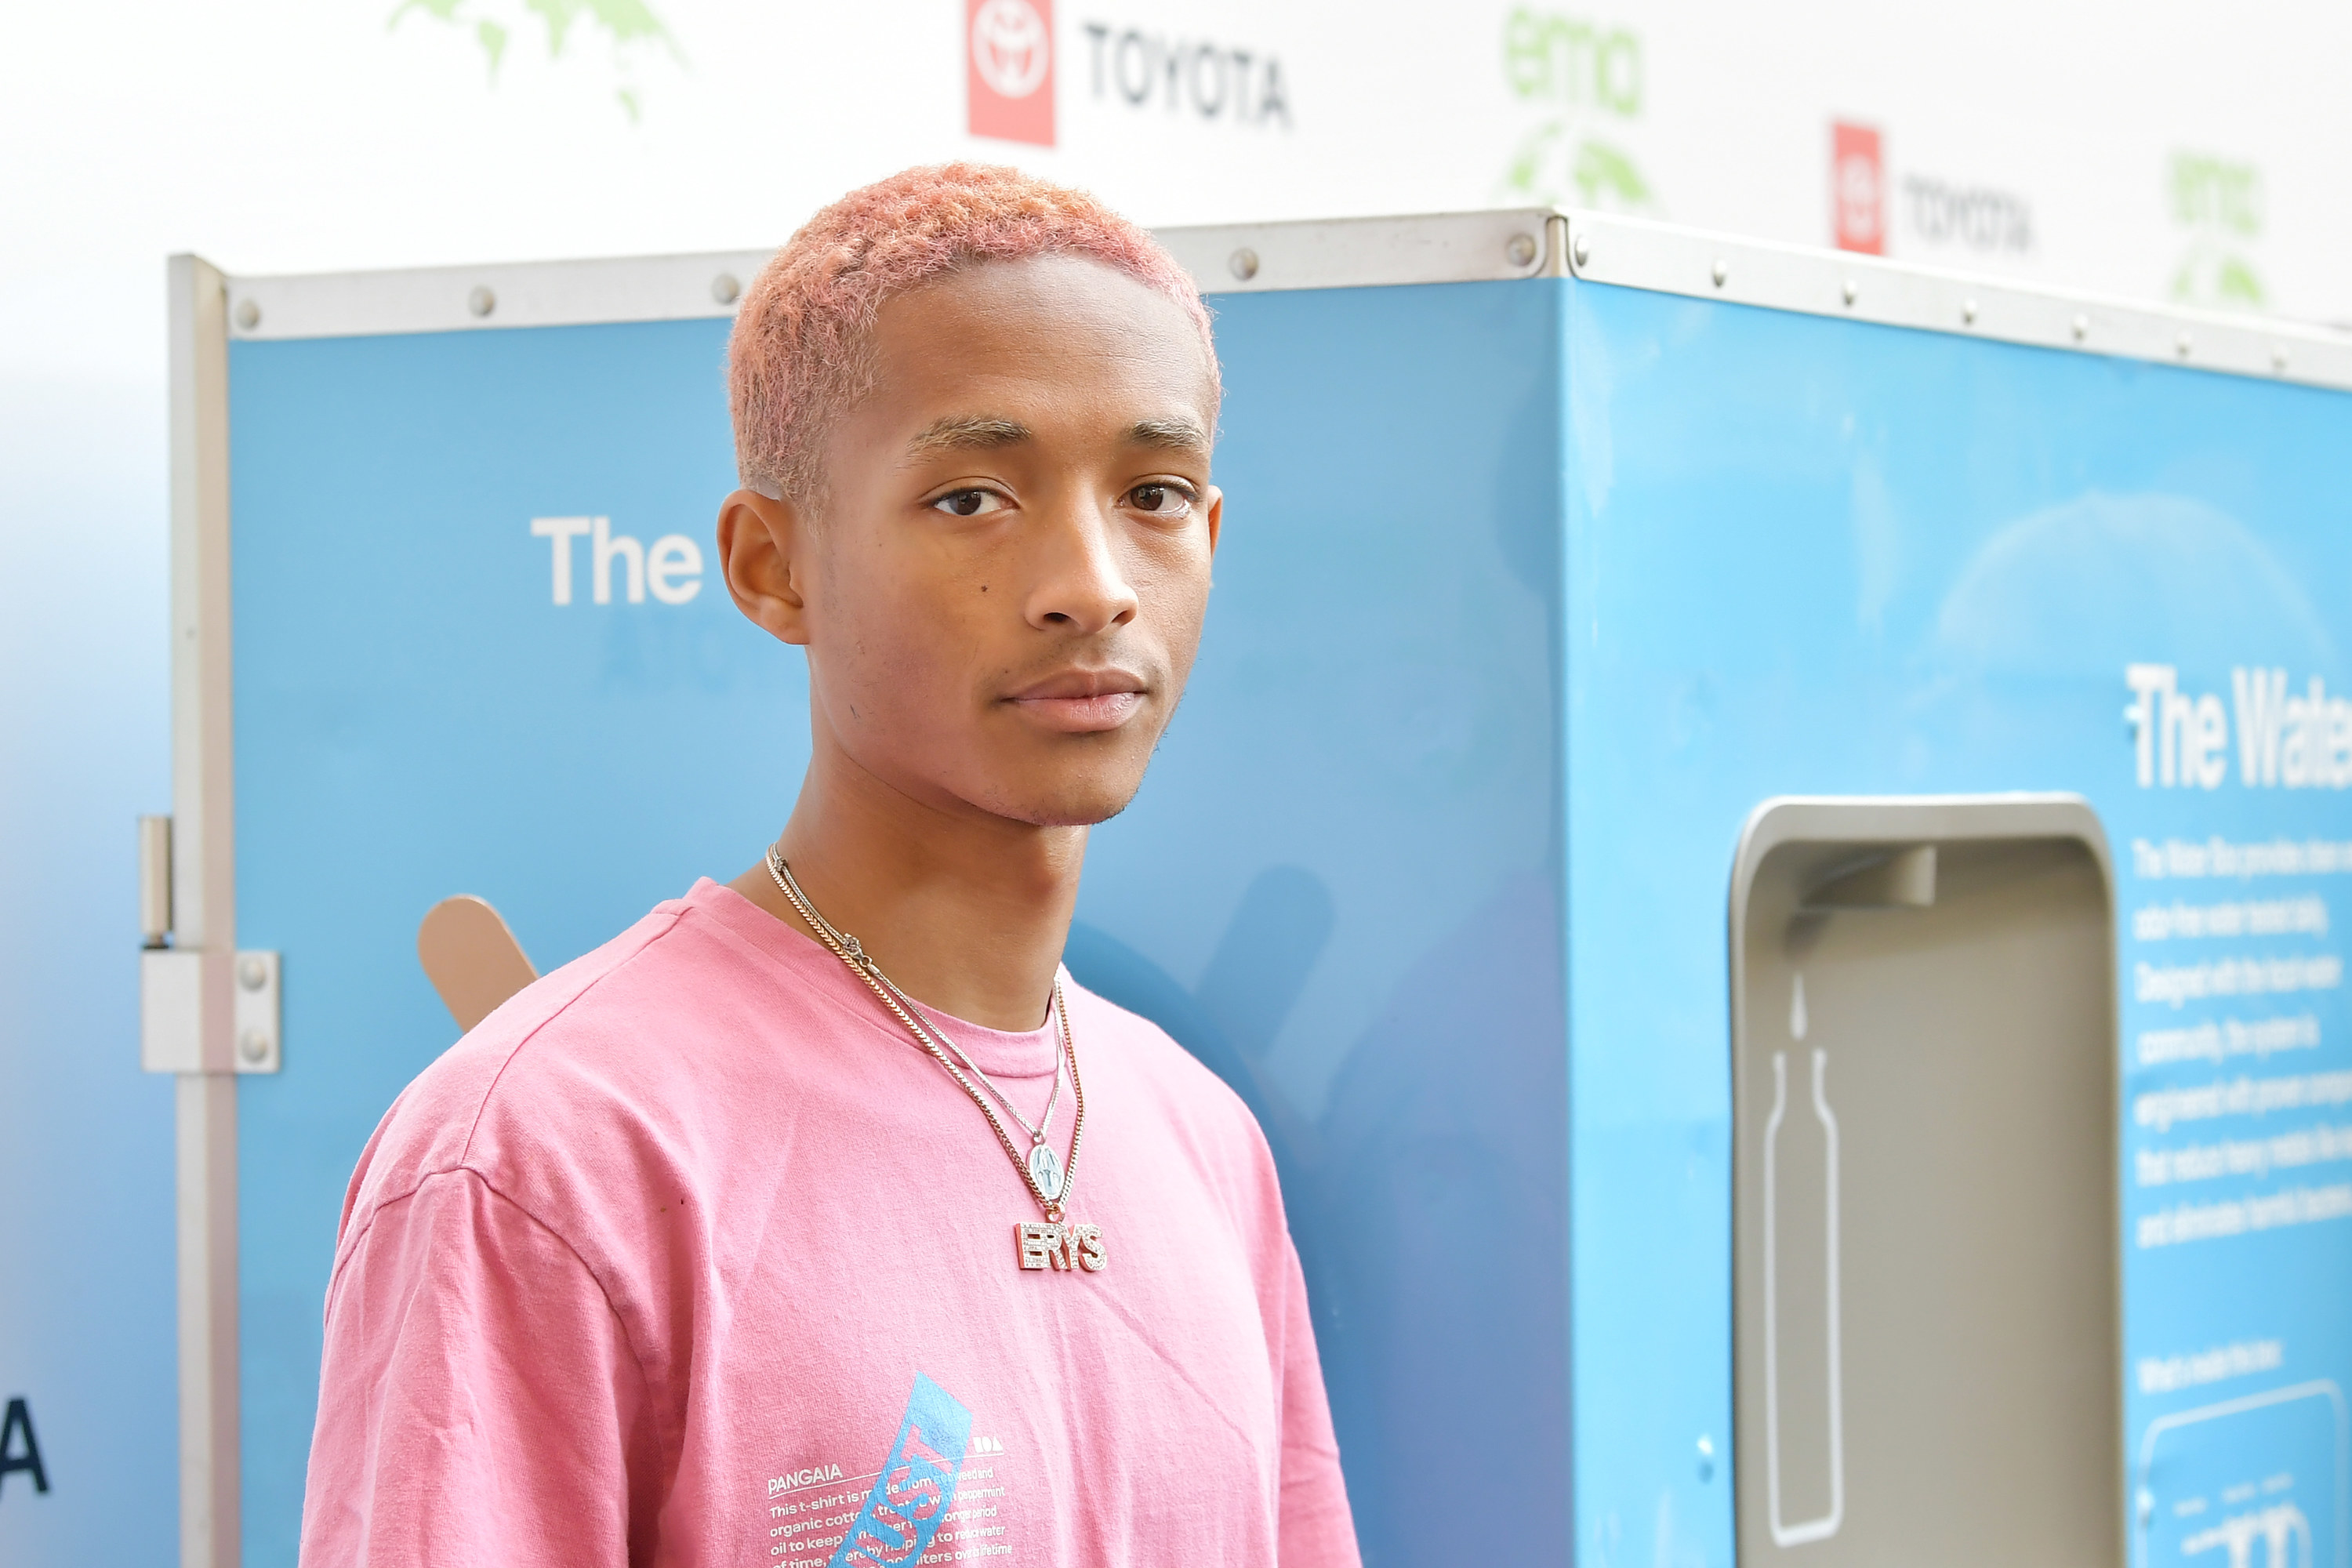 Jaden Smith mocks himself after being ridiculed for resurfaced